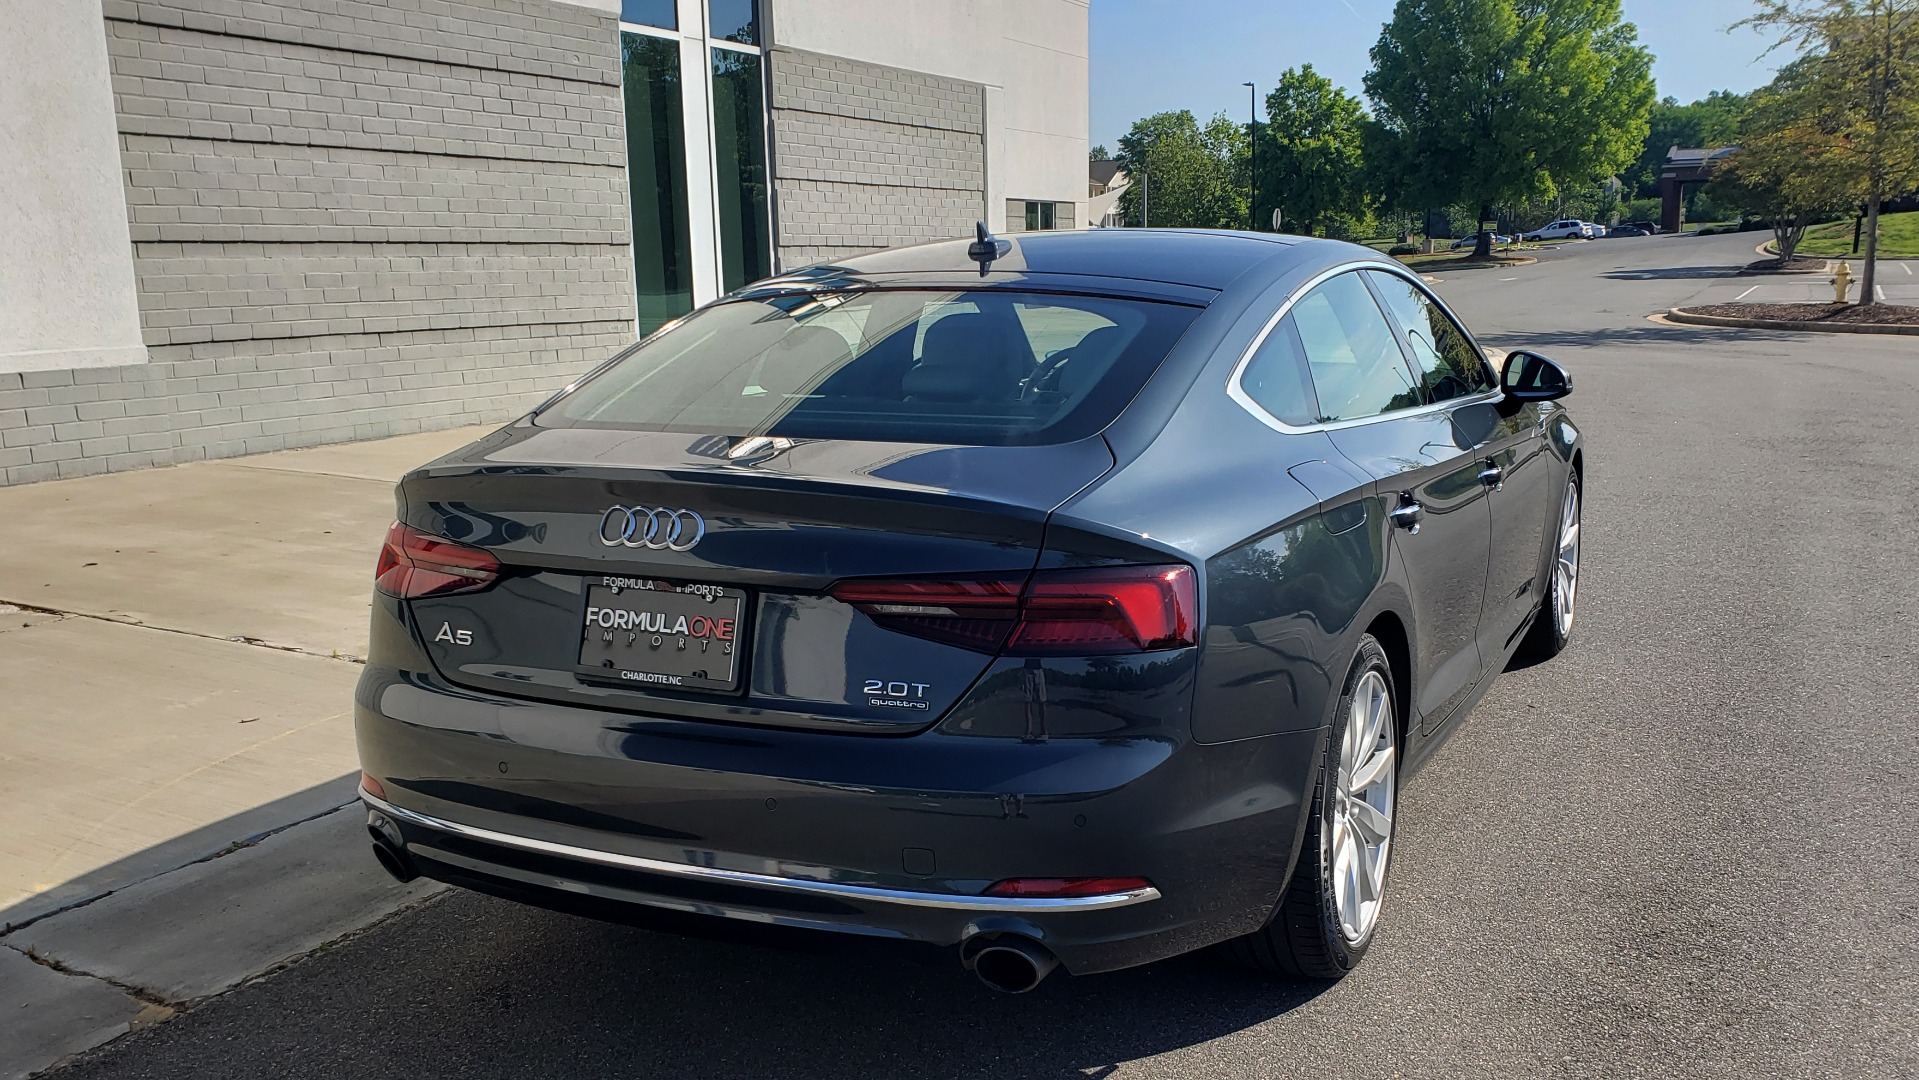 Used 2018 Audi A5 SPORTBACK PREMIUM PLUS 2.0T / AWD / NAV / B&O SND / SUNROOF / REARVIEW for sale Sold at Formula Imports in Charlotte NC 28227 11